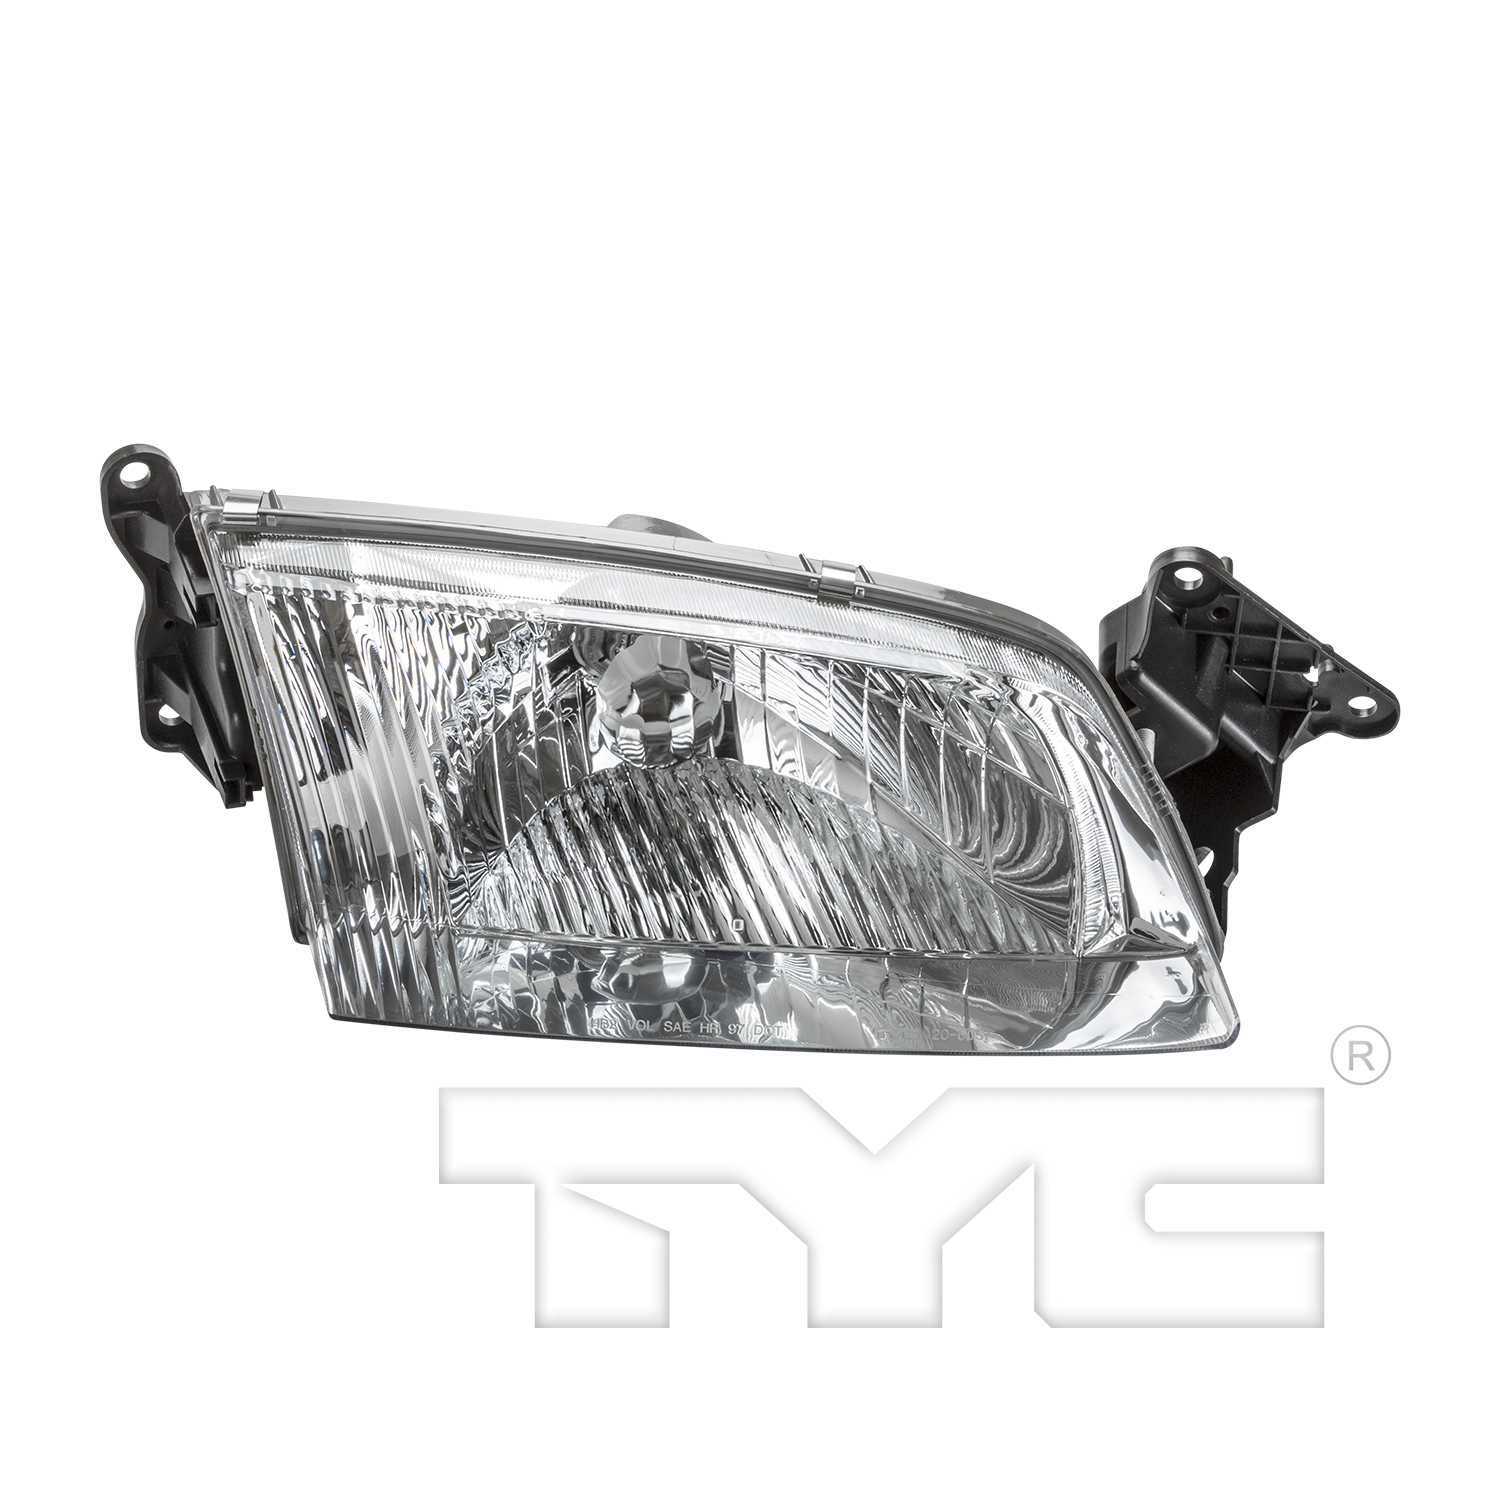 Aftermarket HEADLIGHTS for MAZDA - 626, 626,00-02,RT Headlamp assy composite